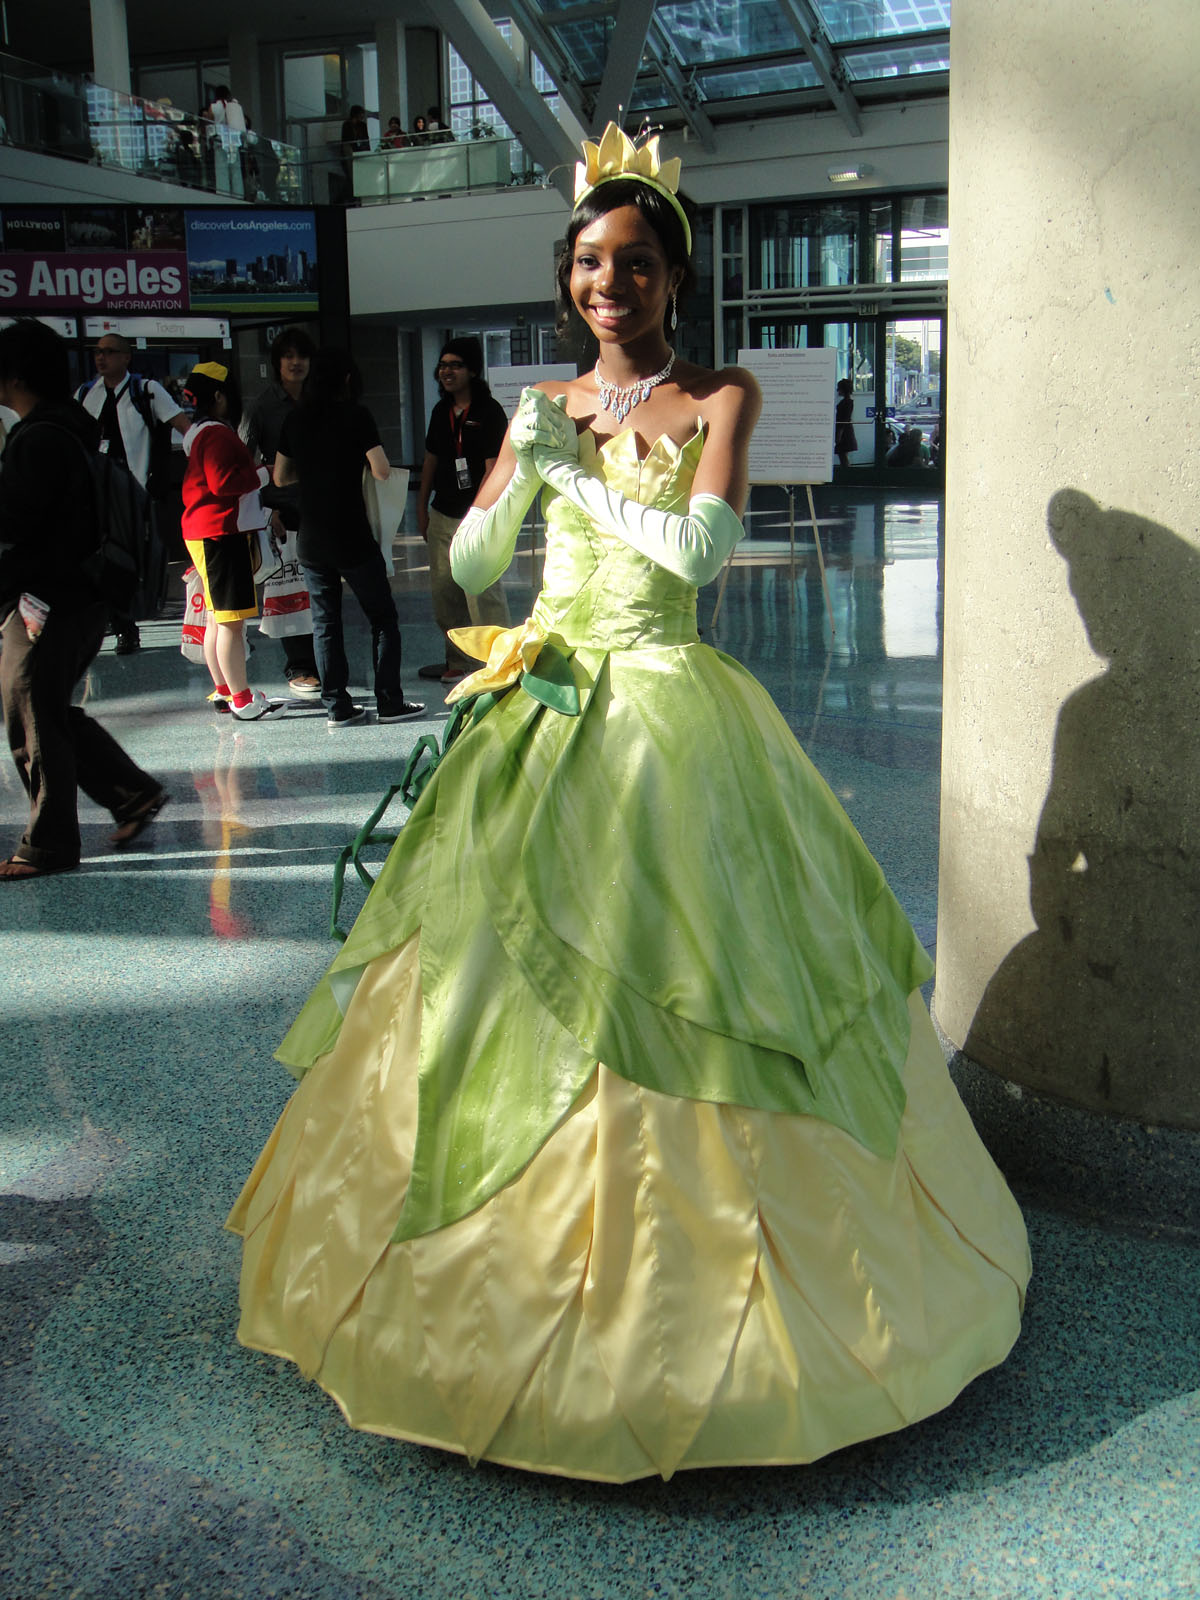 Tiana from The Princess and the Frog